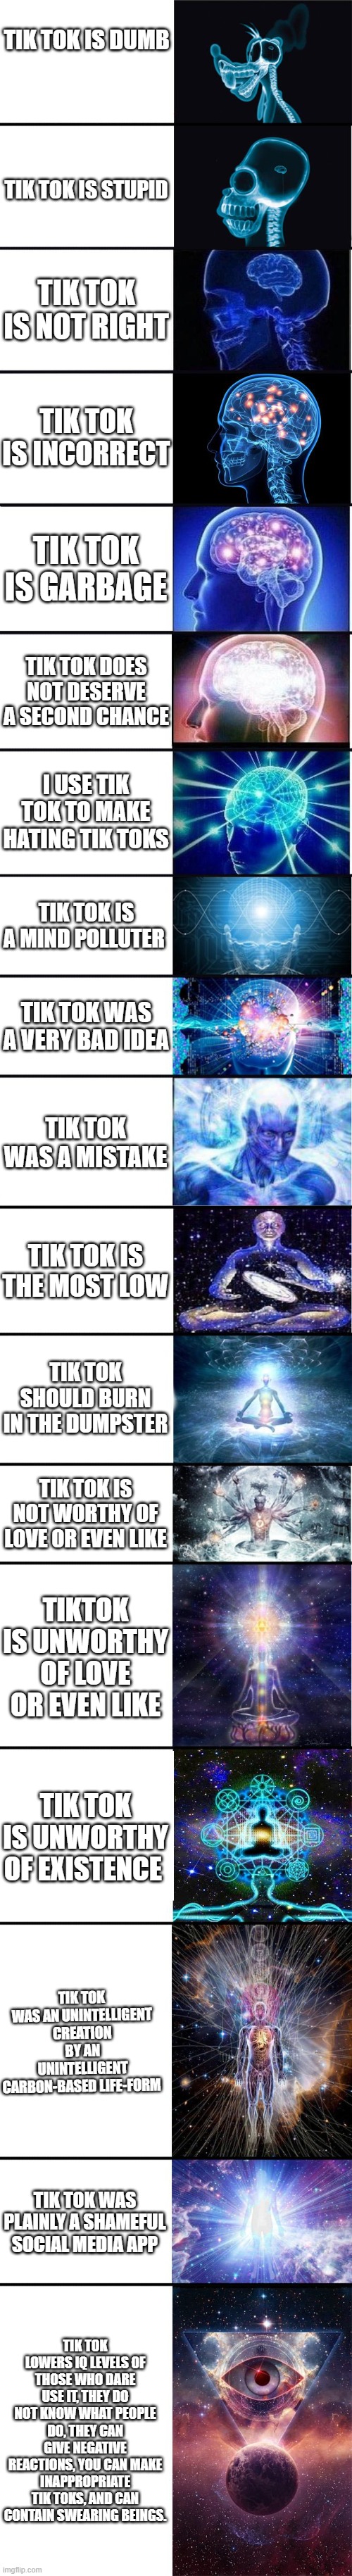 T H E U L T I M A T E A N T I T I K T O K W I T H 18 T I E R S O F B R A I N E X P A N S I O N | TIK TOK IS DUMB; TIK TOK IS STUPID; TIK TOK IS NOT RIGHT; TIK TOK IS INCORRECT; TIK TOK IS GARBAGE; TIK TOK DOES NOT DESERVE A SECOND CHANCE; I USE TIK TOK TO MAKE HATING TIK TOKS; TIK TOK IS A MIND POLLUTER; TIK TOK WAS A VERY BAD IDEA; TIK TOK WAS A MISTAKE; TIK TOK IS THE MOST LOW; TIK TOK SHOULD BURN IN THE DUMPSTER; TIK TOK IS NOT WORTHY OF LOVE OR EVEN LIKE; TIKTOK IS UNWORTHY OF LOVE OR EVEN LIKE; TIK TOK IS UNWORTHY OF EXISTENCE; TIK TOK WAS AN UNINTELLIGENT CREATION
BY AN UNINTELLIGENT CARBON-BASED LIFE-FORM; TIK TOK WAS PLAINLY A SHAMEFUL SOCIAL MEDIA APP; TIK TOK LOWERS IQ LEVELS OF THOSE WHO DARE USE IT, THEY DO NOT KNOW WHAT PEOPLE DO, THEY CAN GIVE NEGATIVE REACTIONS, YOU CAN MAKE INAPPROPRIATE TIK TOKS, AND CAN CONTAIN SWEARING BEINGS. | image tagged in expanding brain 9001 | made w/ Imgflip meme maker